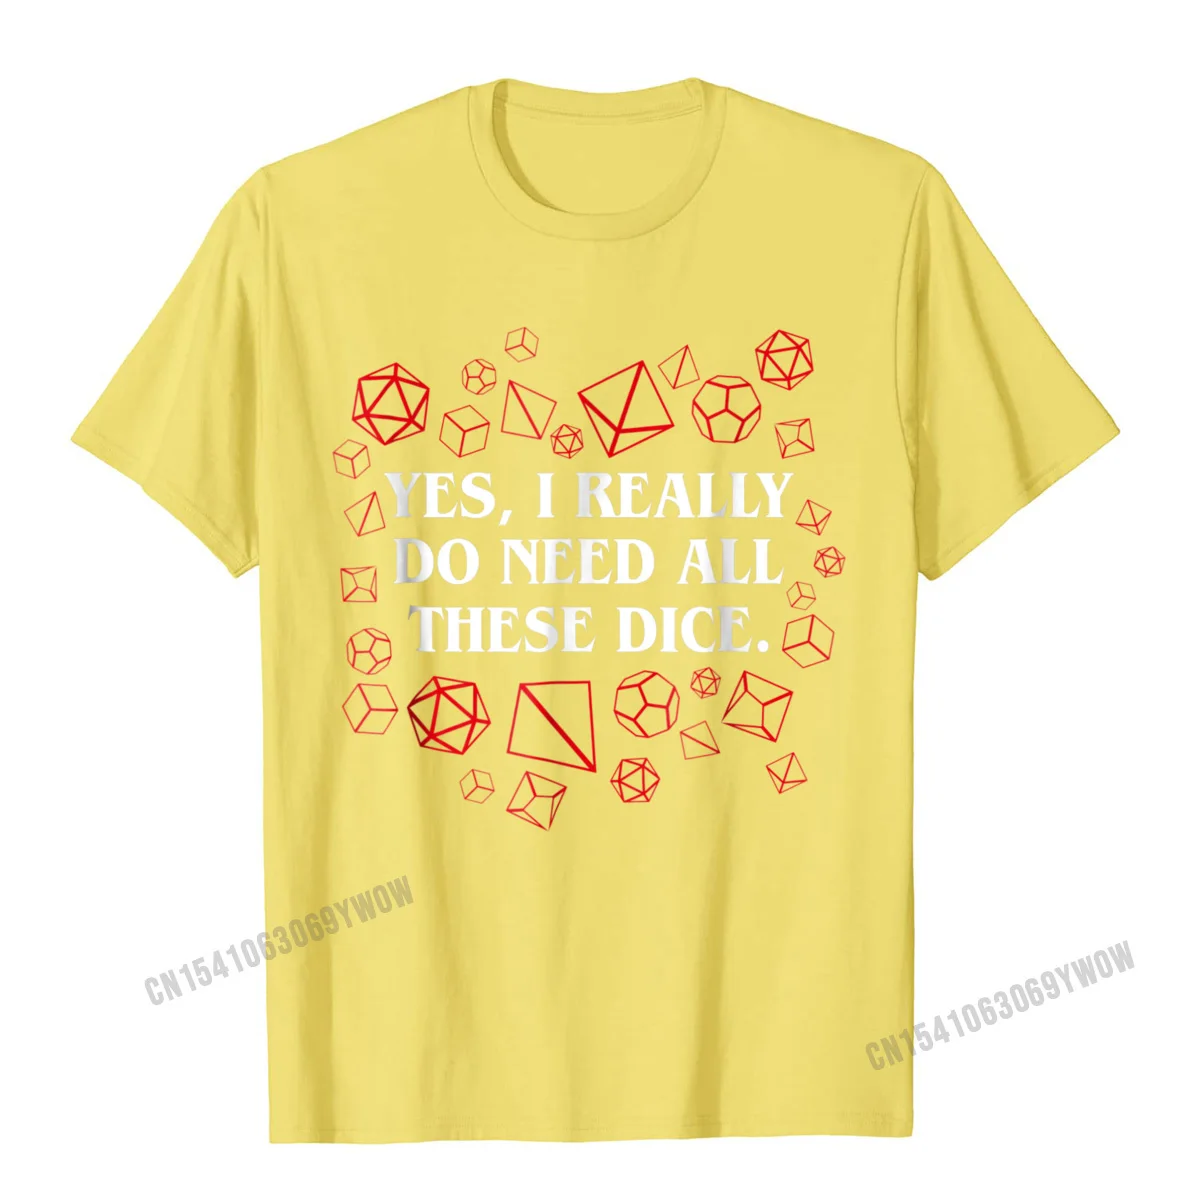 Personalized All Cotton Printed On Tees Newest Short Sleeve Men Top T-shirts Family Labor Day Tee-Shirts Crew Neck I Really Do Need All These Polyhedral Dice Set D20 T-Shirt__1031 yellow